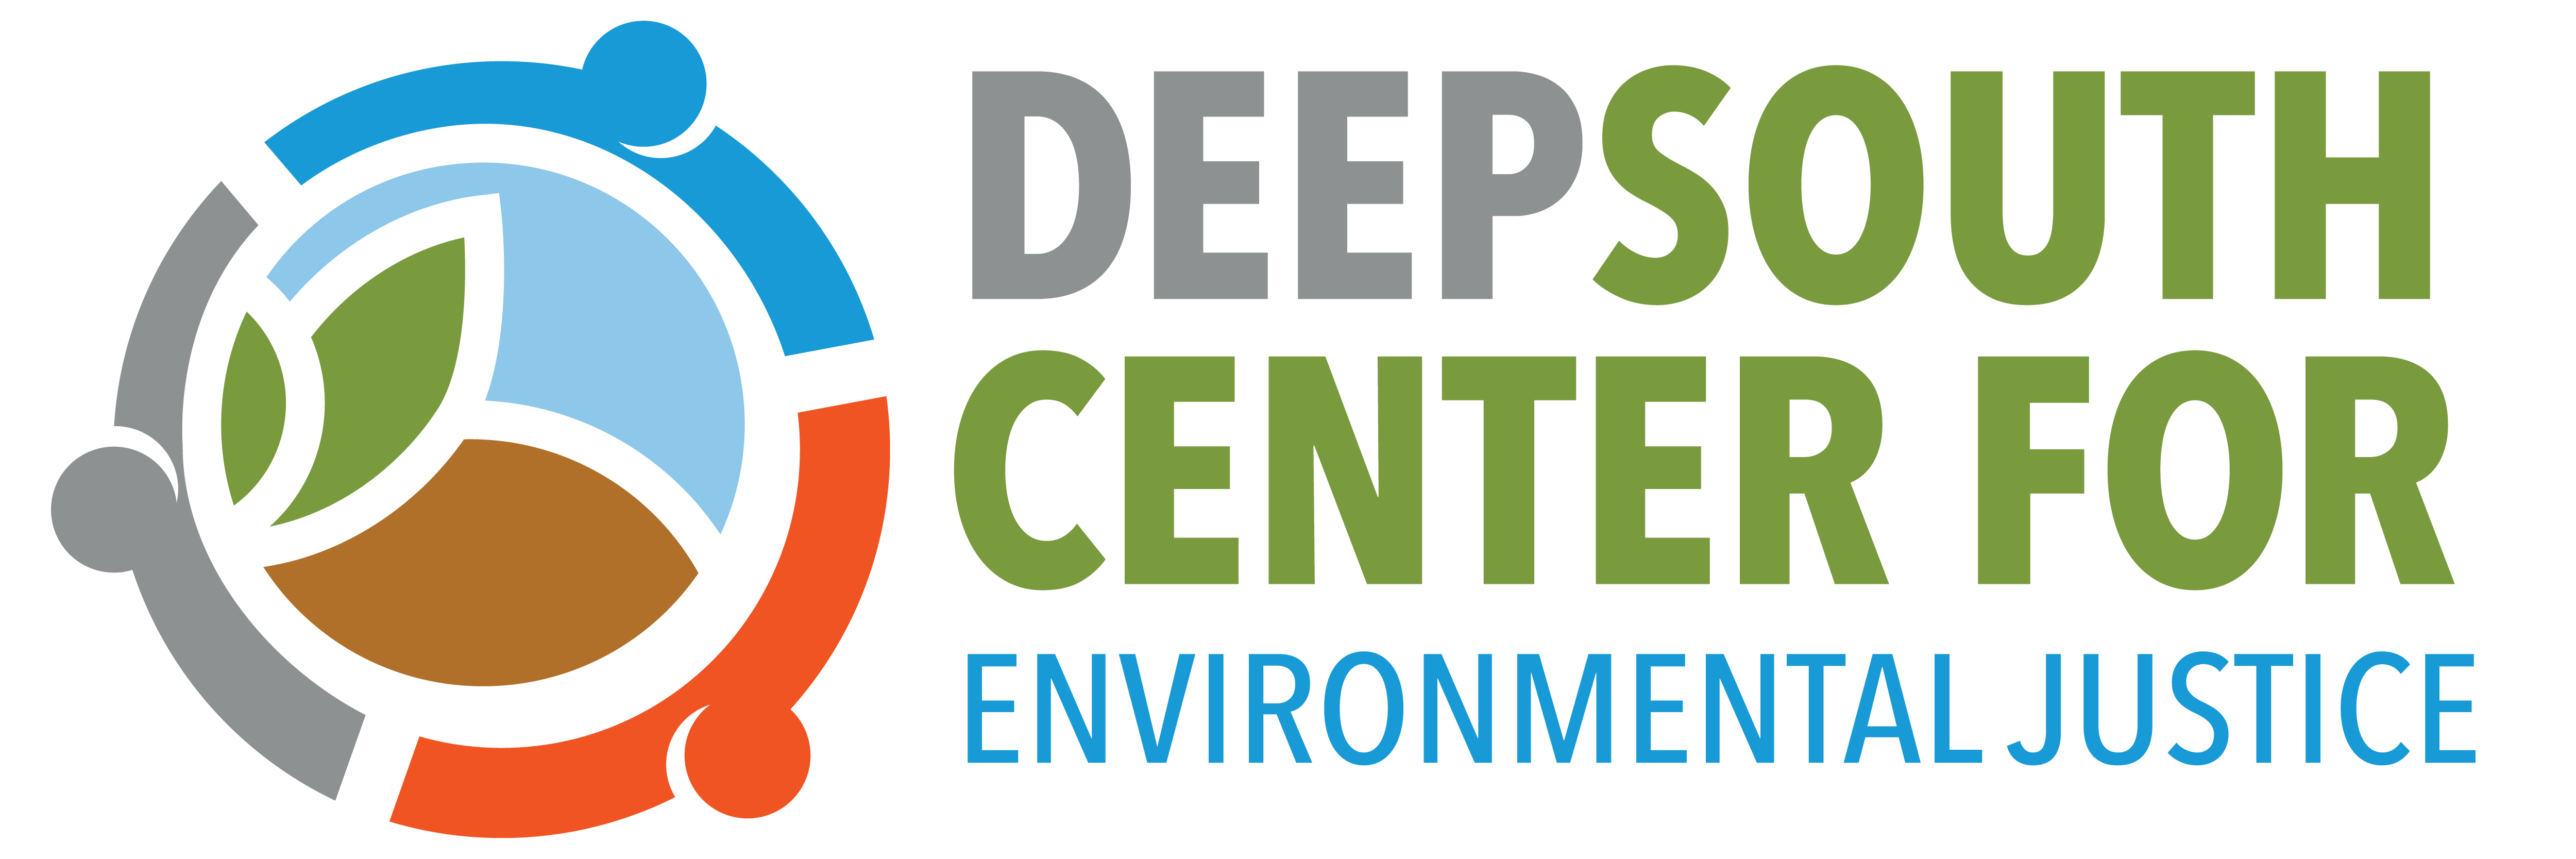 Deep South Center for Environmental Justice, Inc.